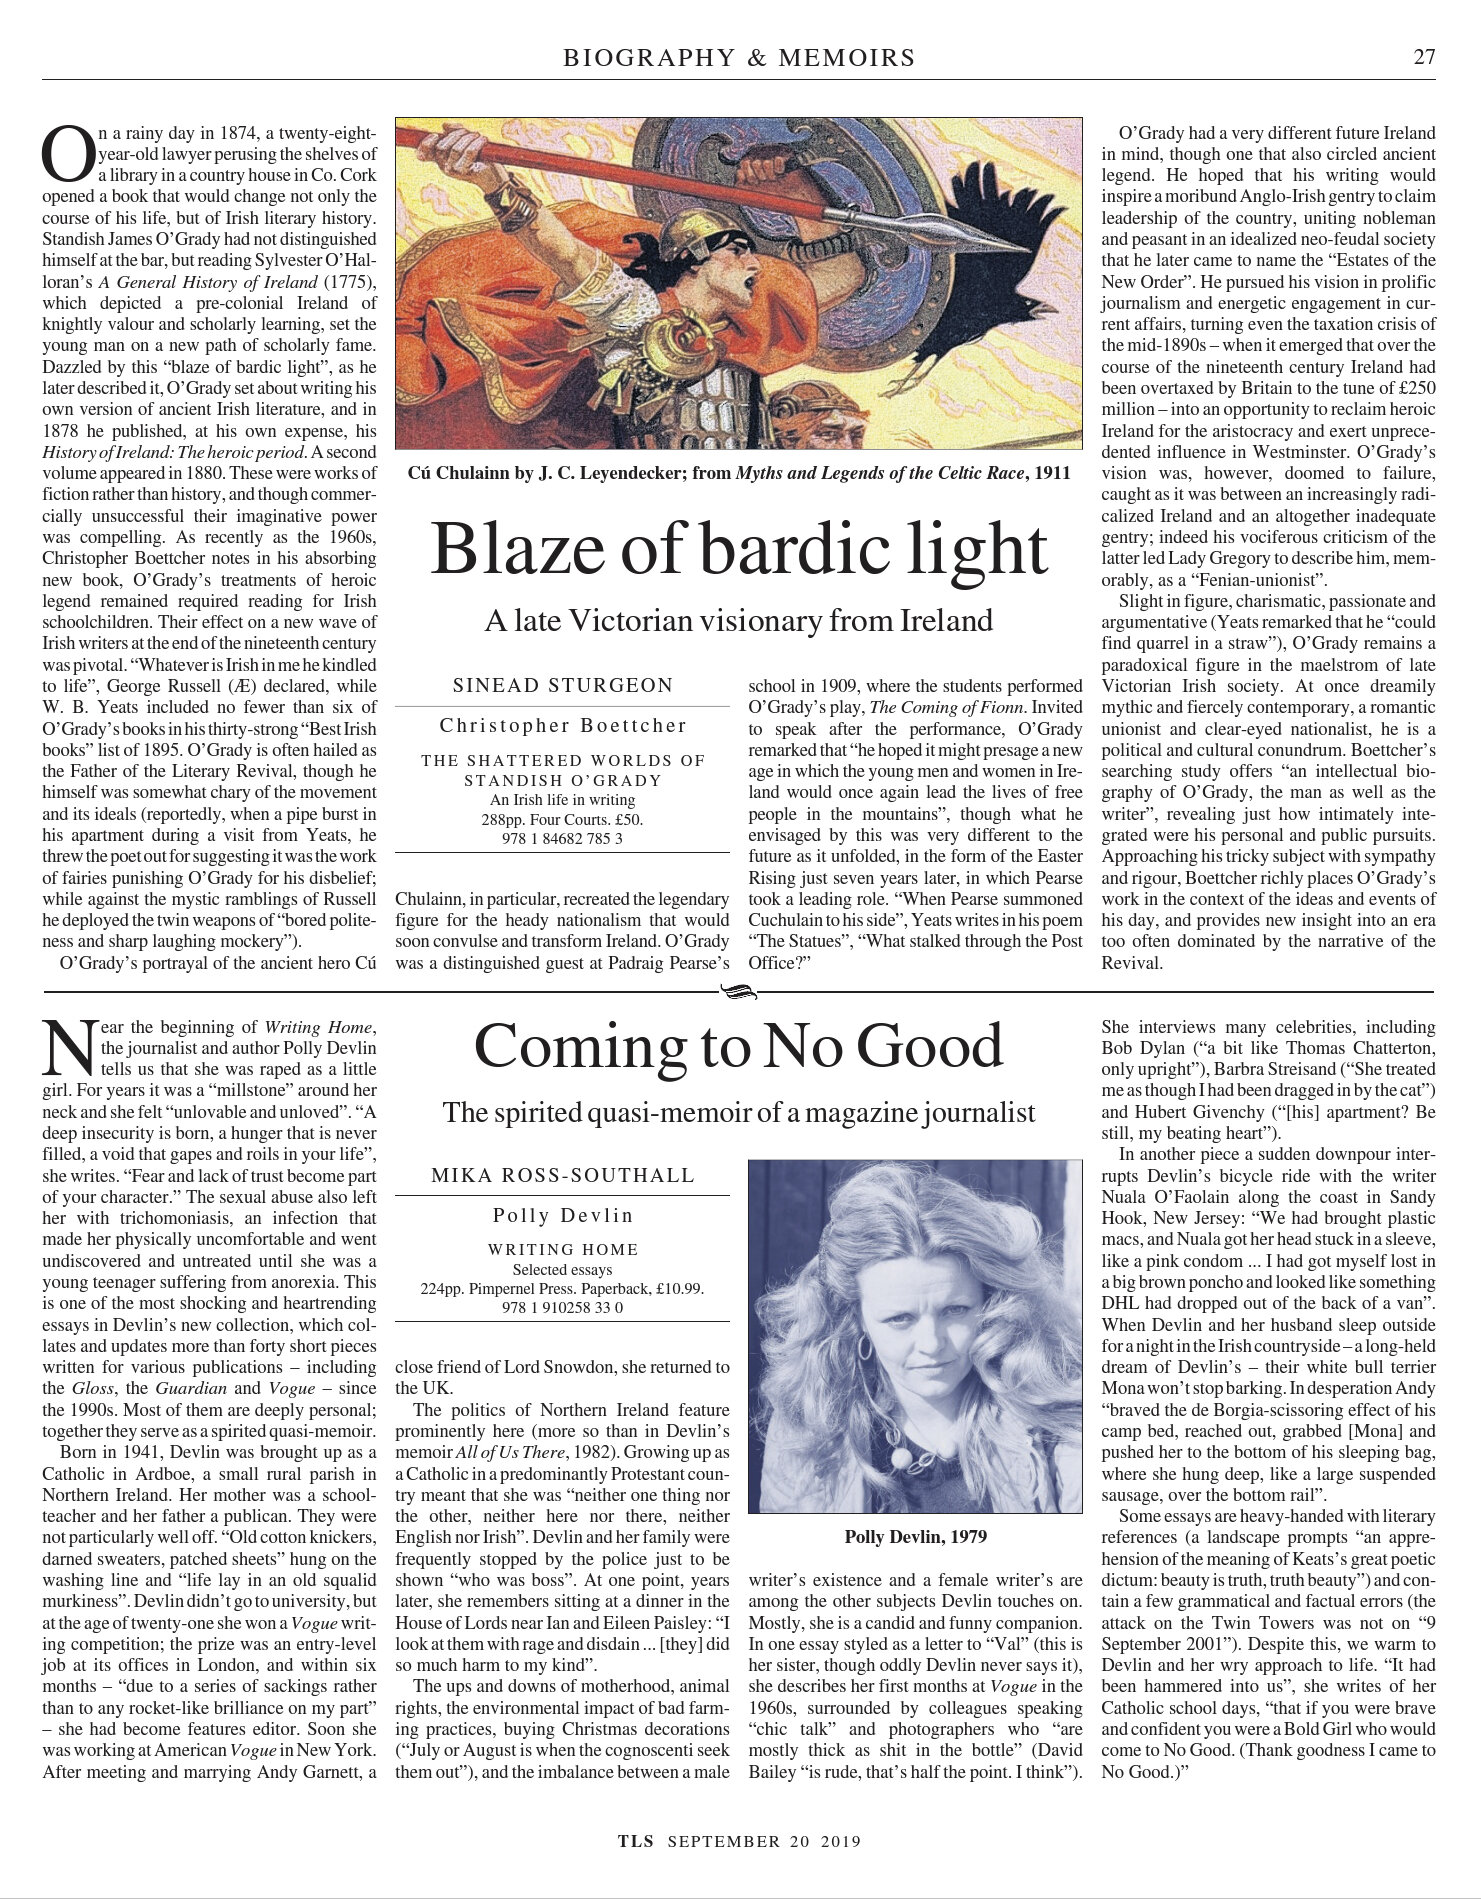 The Times Literary Supplement, 20 September 2019. "Coming to No Good"